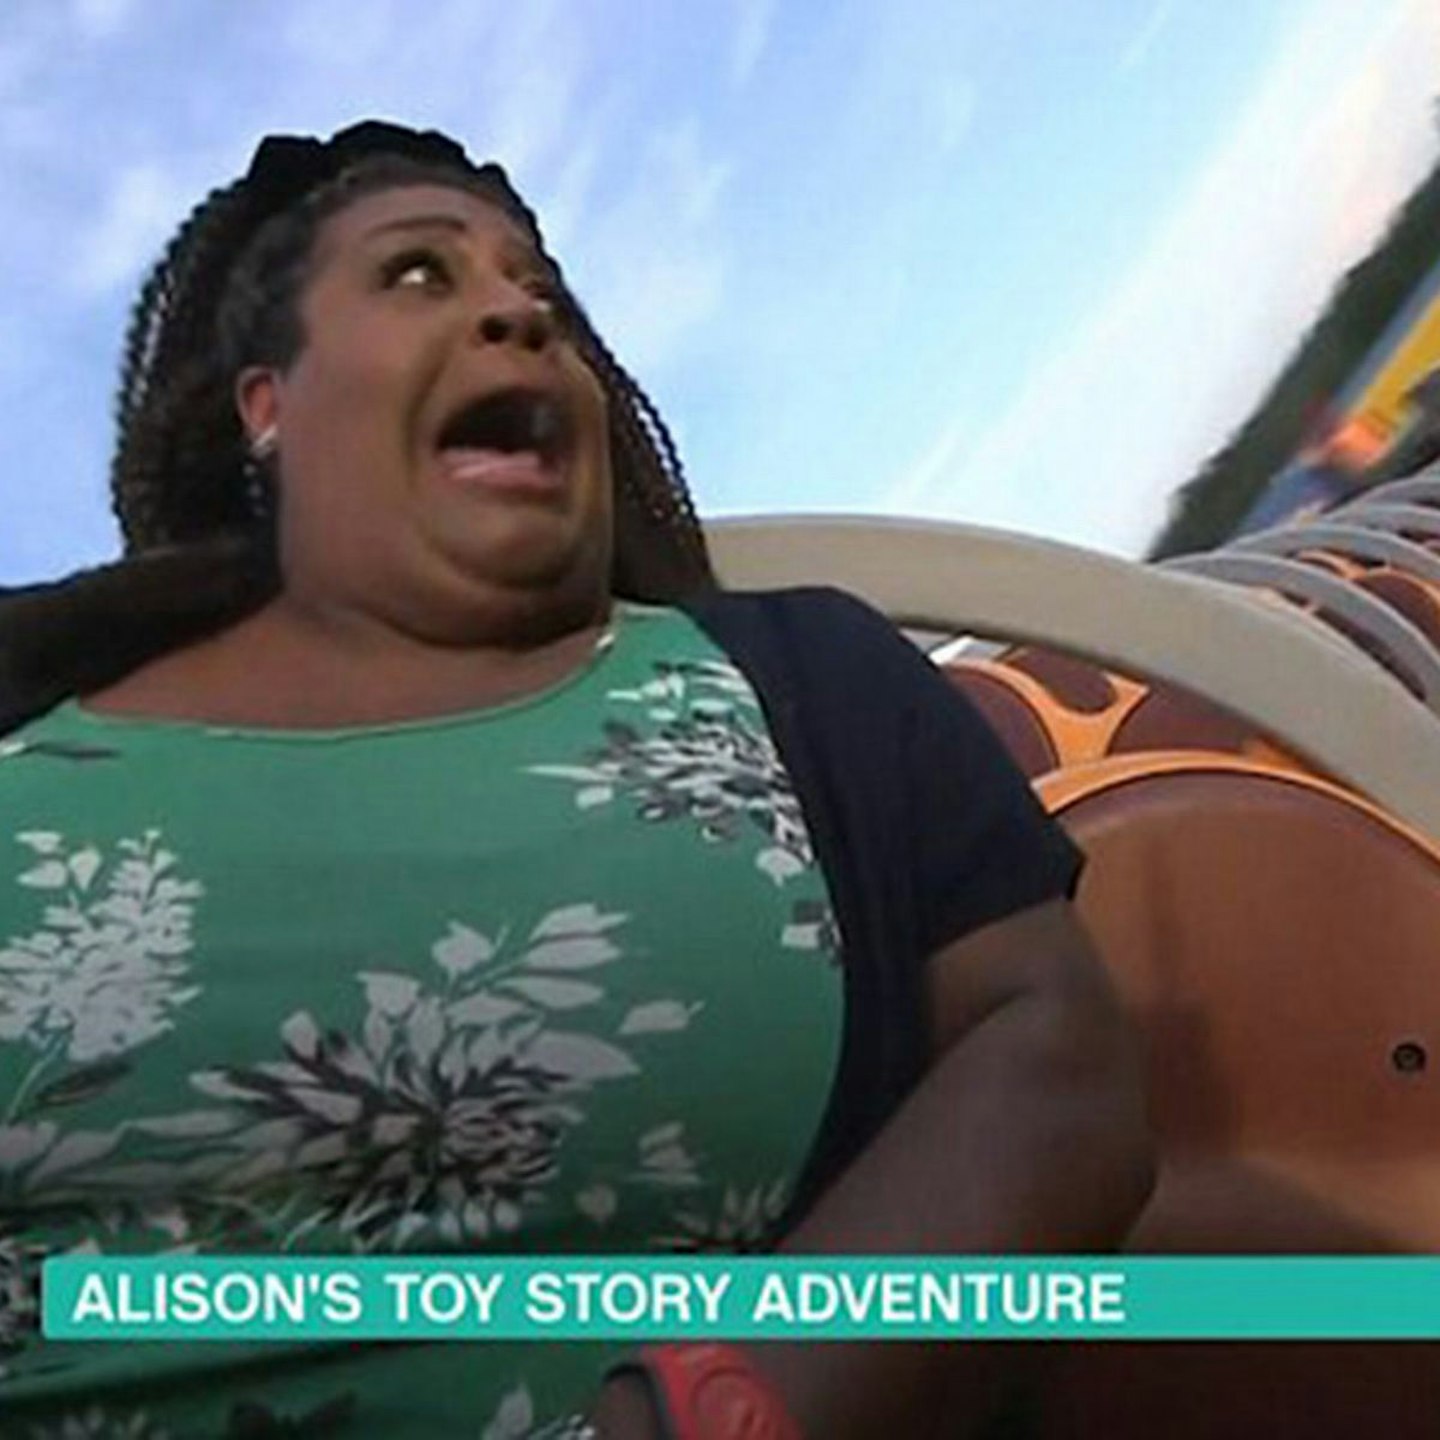 Alison on the Toy Story rollercoaster in Disney Land Florida